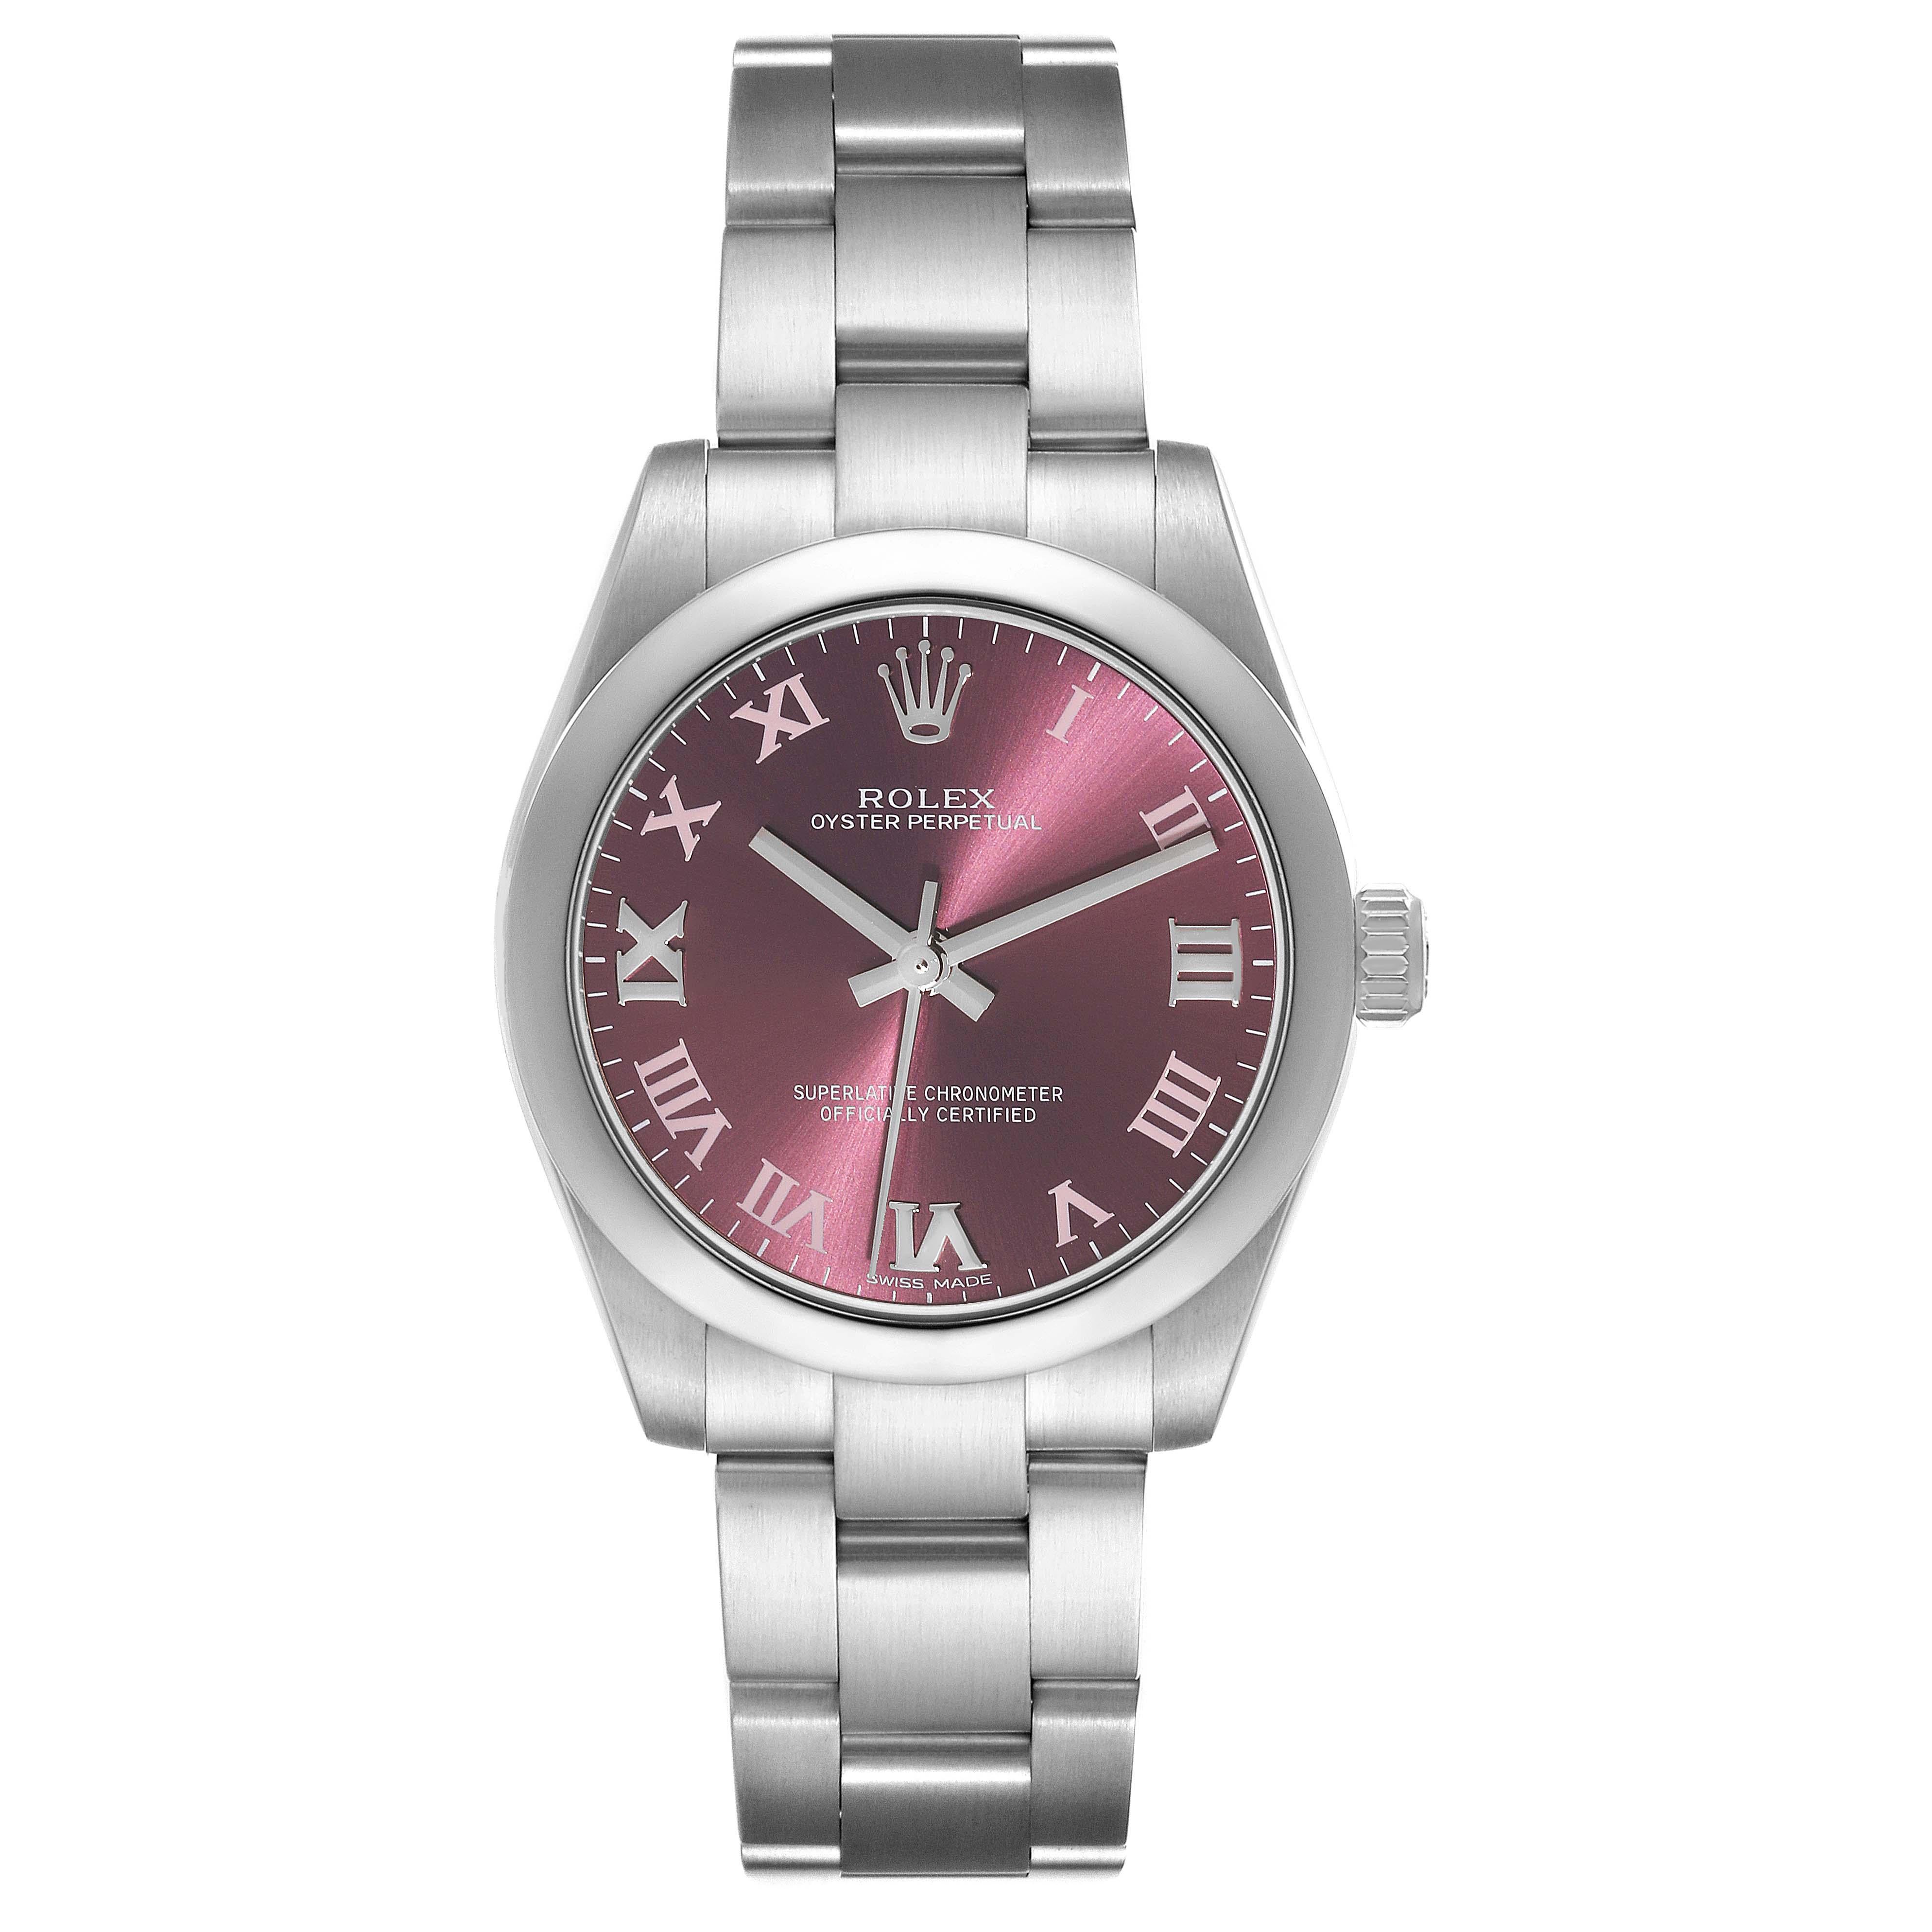 Rolex Oyster Perpetual Midsize Red Grape Silver Ladies Watch 177200 Box Card. Officially certified chronometer automatic self-winding movement. Stainless steel oyster case 31.0 mm in diameter. Rolex logo on the crown. Stainless steel smooth domed